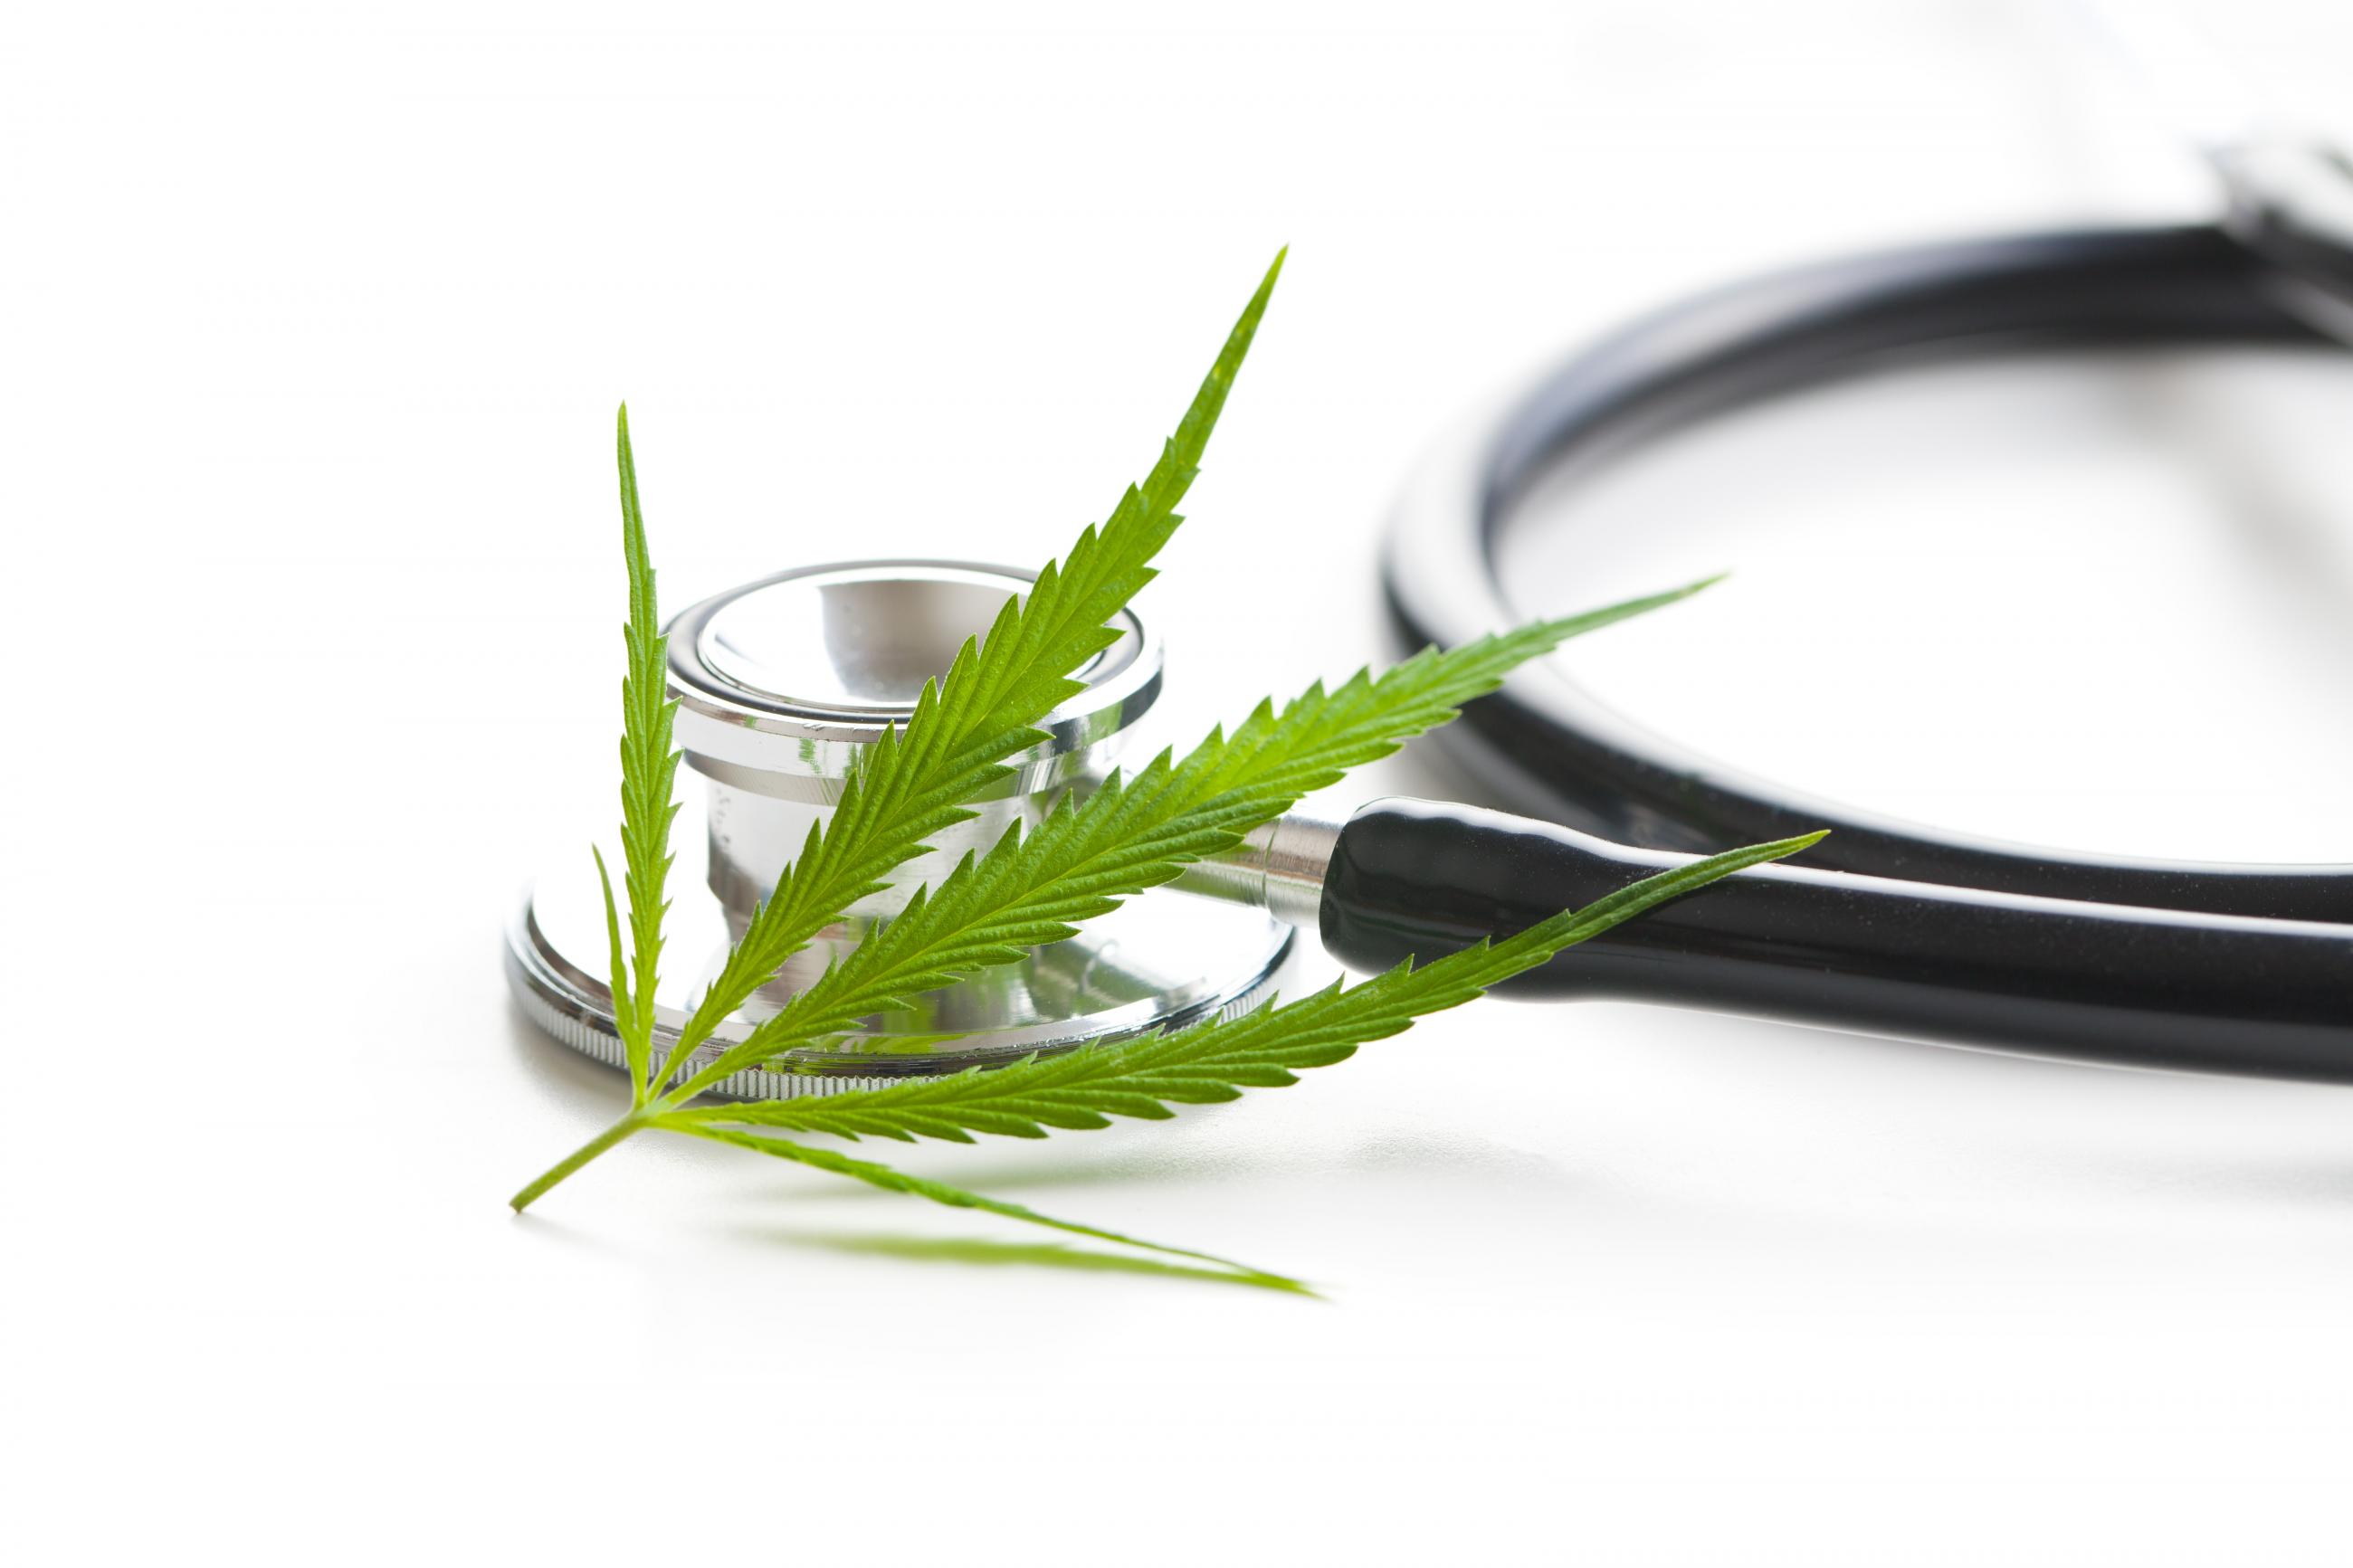 Three new locations in which to obtain your medical marijuana license